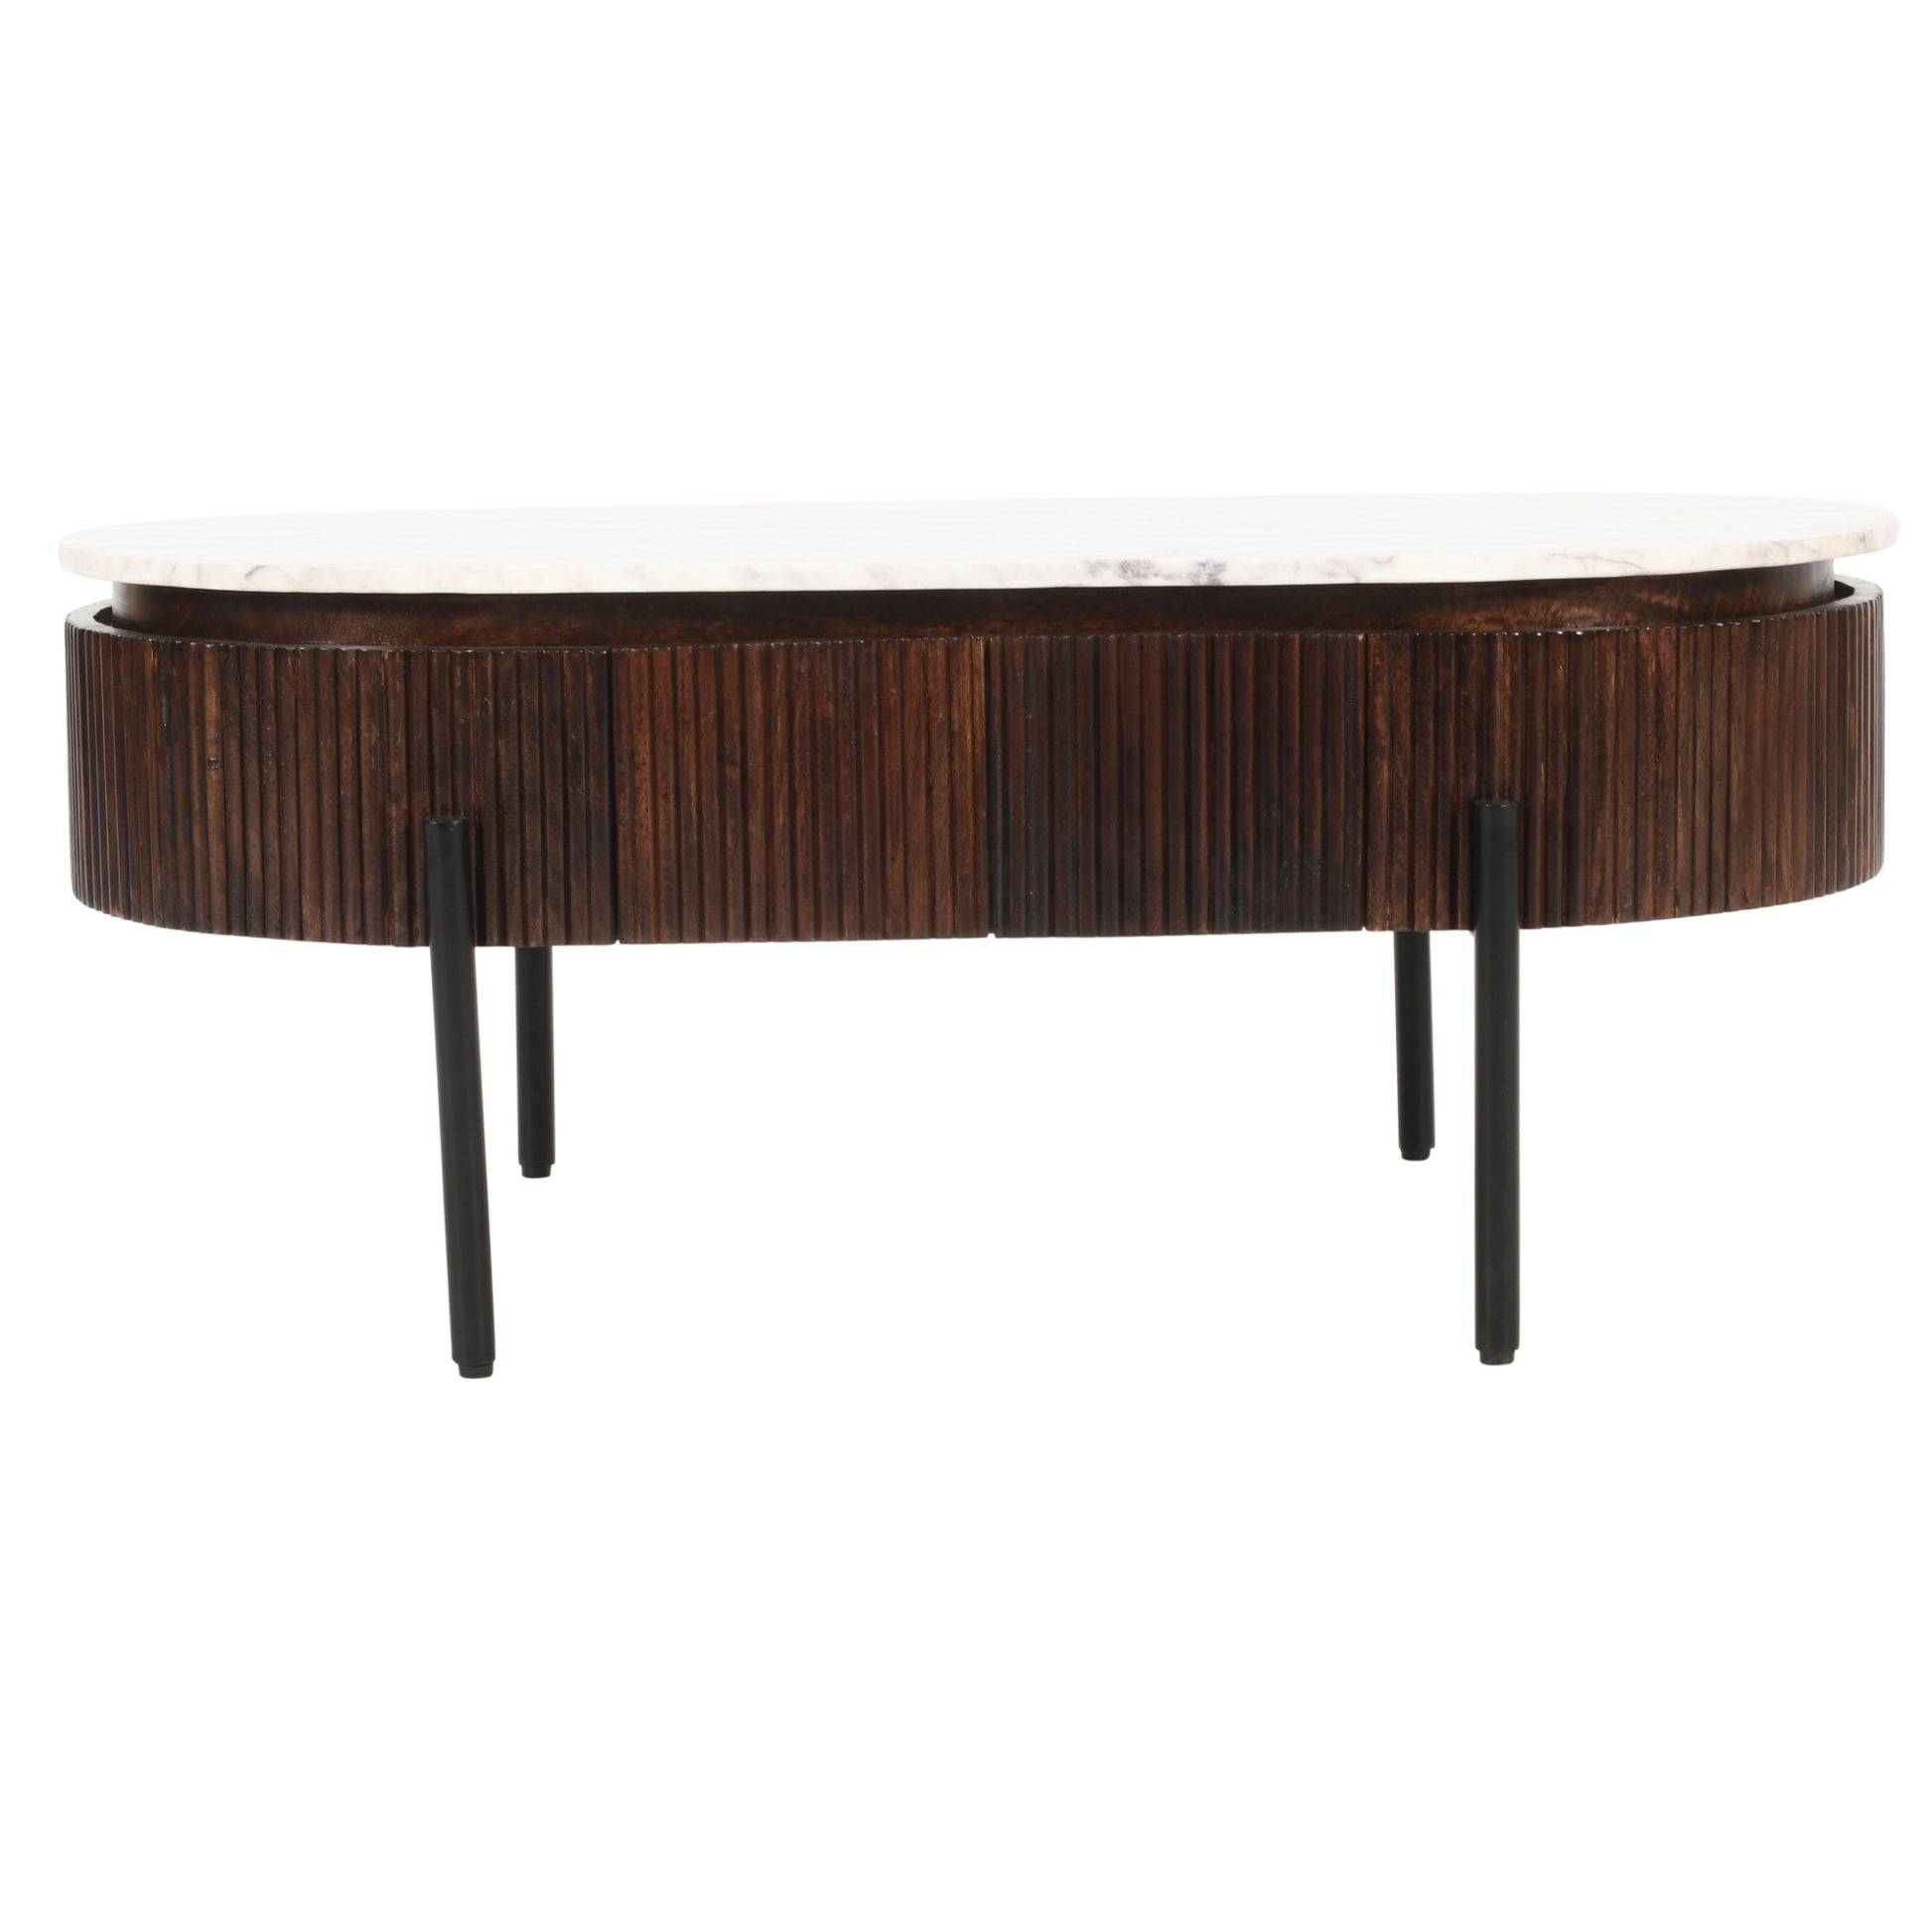 Opal Mango Wood Rectangular Fluted Coffee Table With Marble Top & Metal Legs